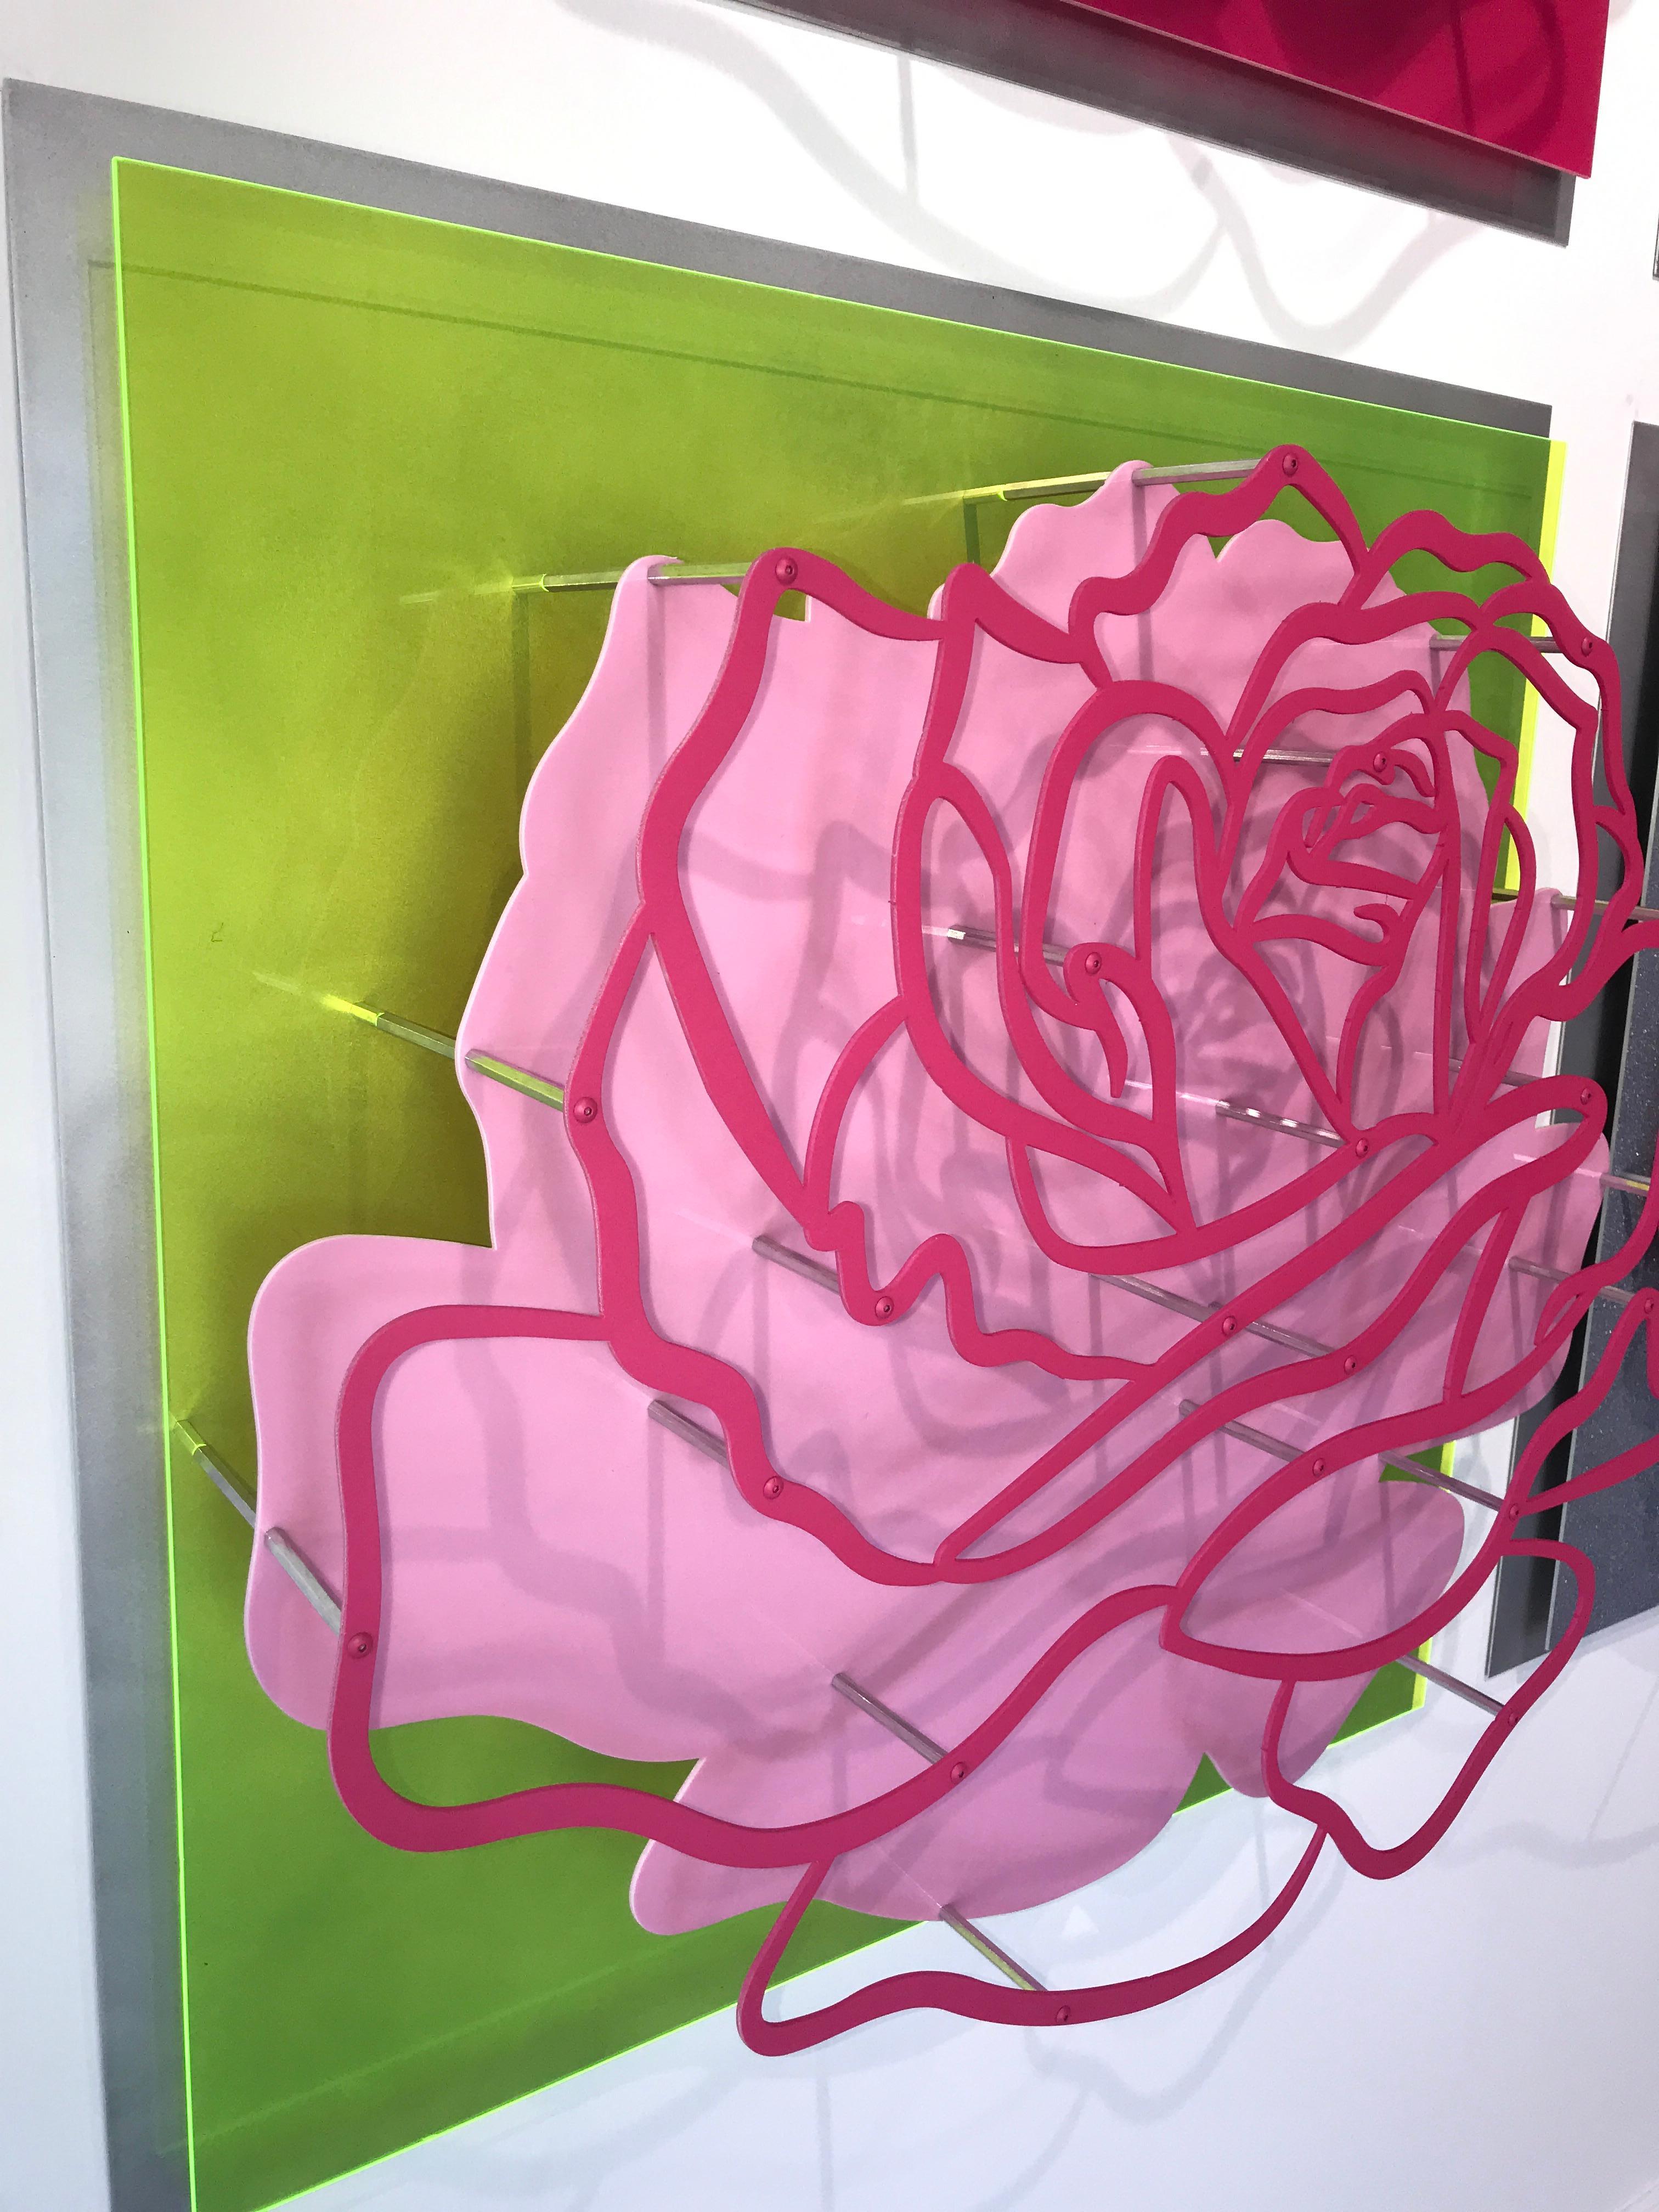 Six Roses - Wall sculpture  - Contemporary Painting by Michael Kalish